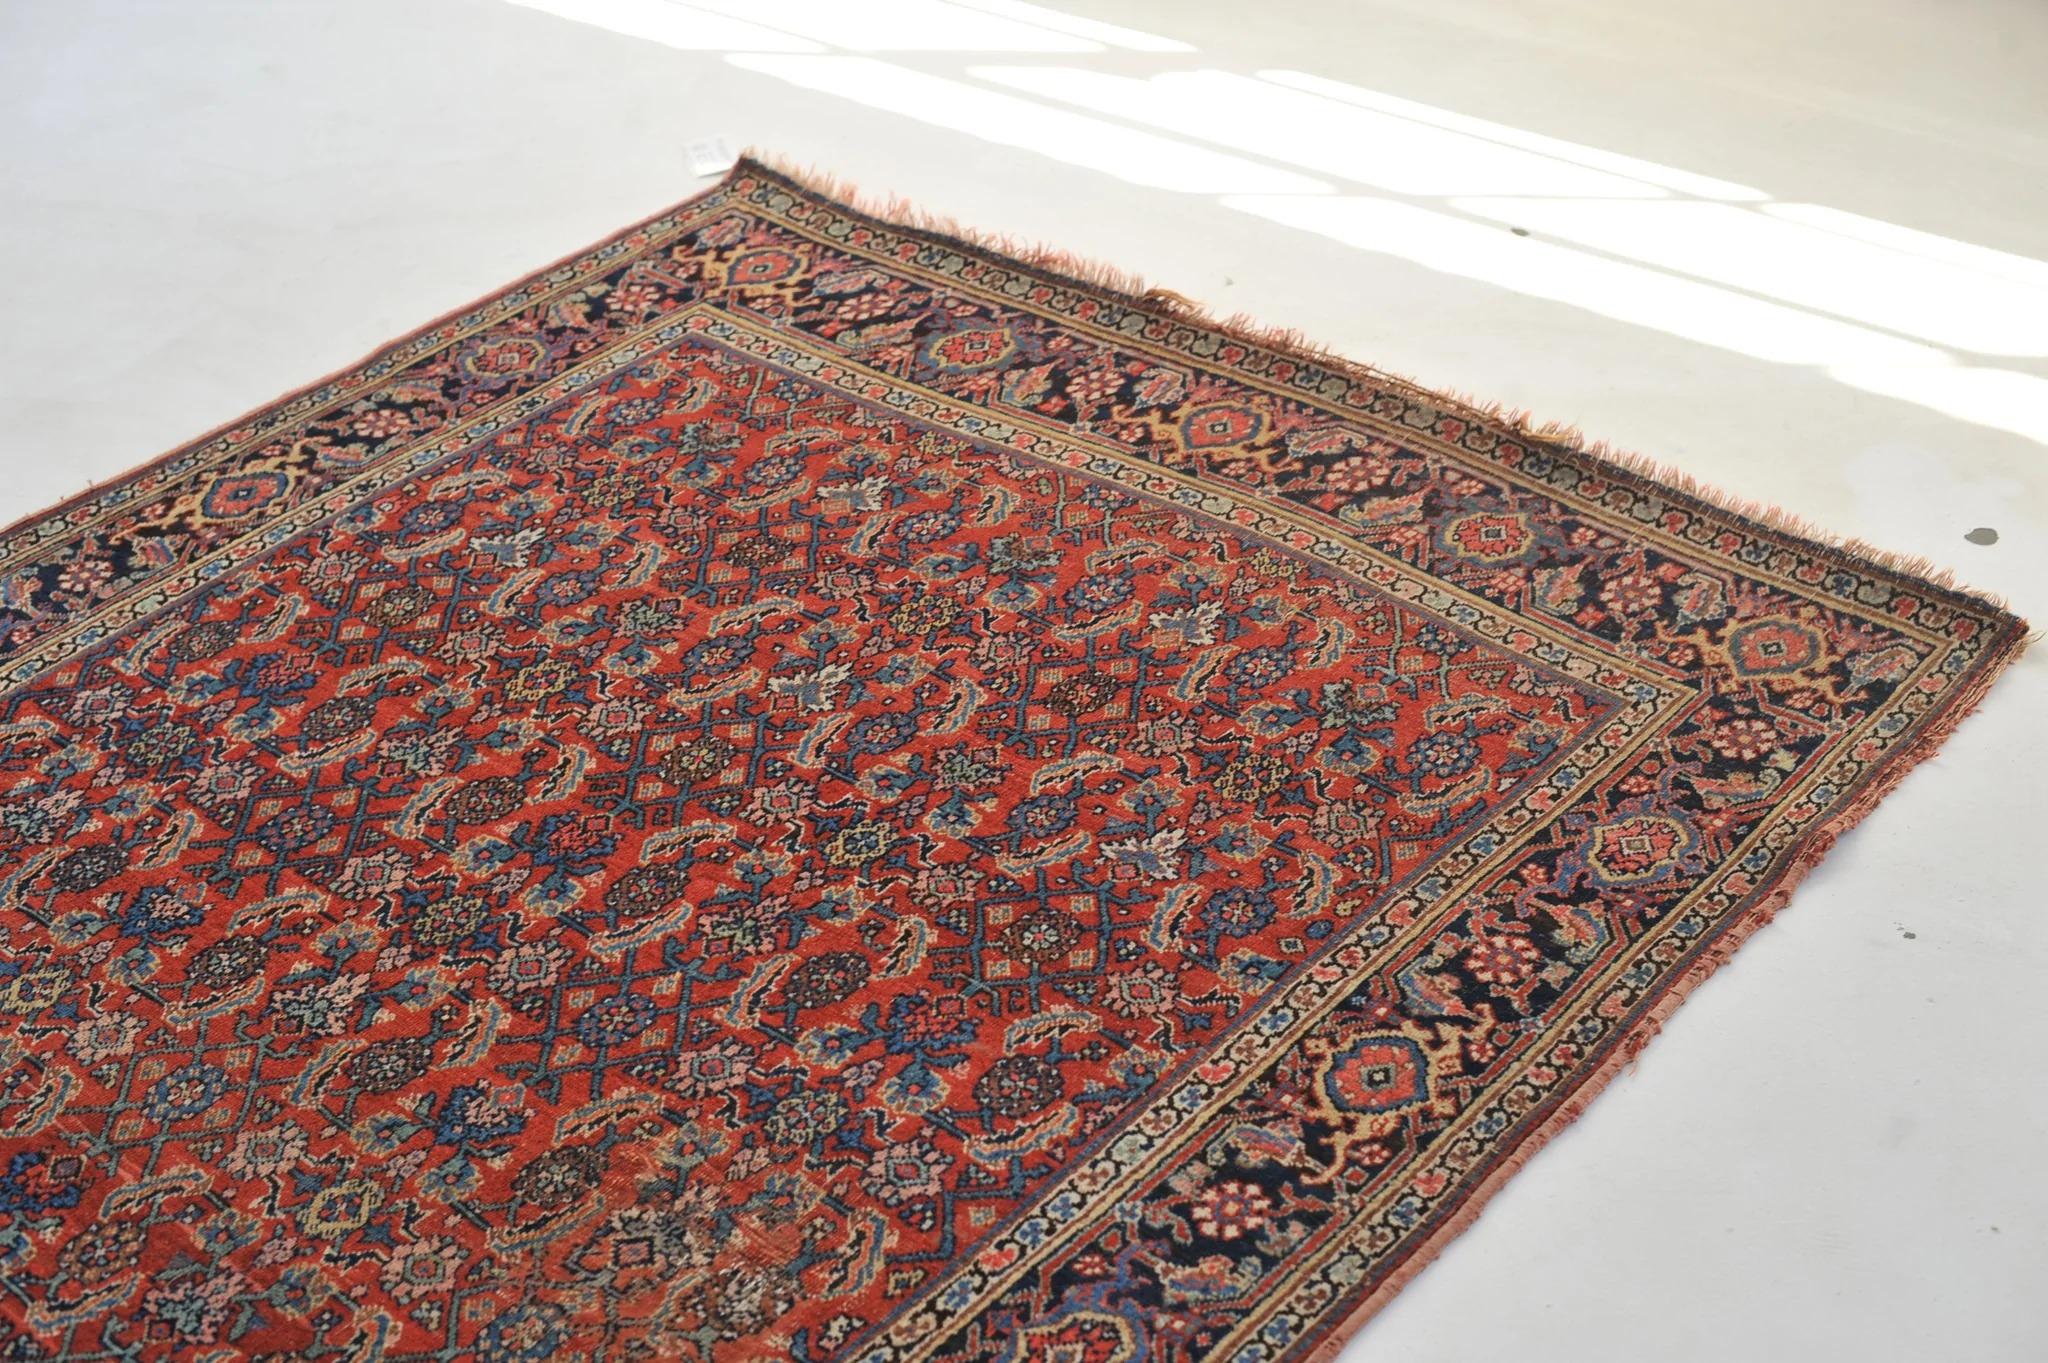 Dyed Rare Sensational Antique Rug with Iconic Herati Pattern, C. 1920's